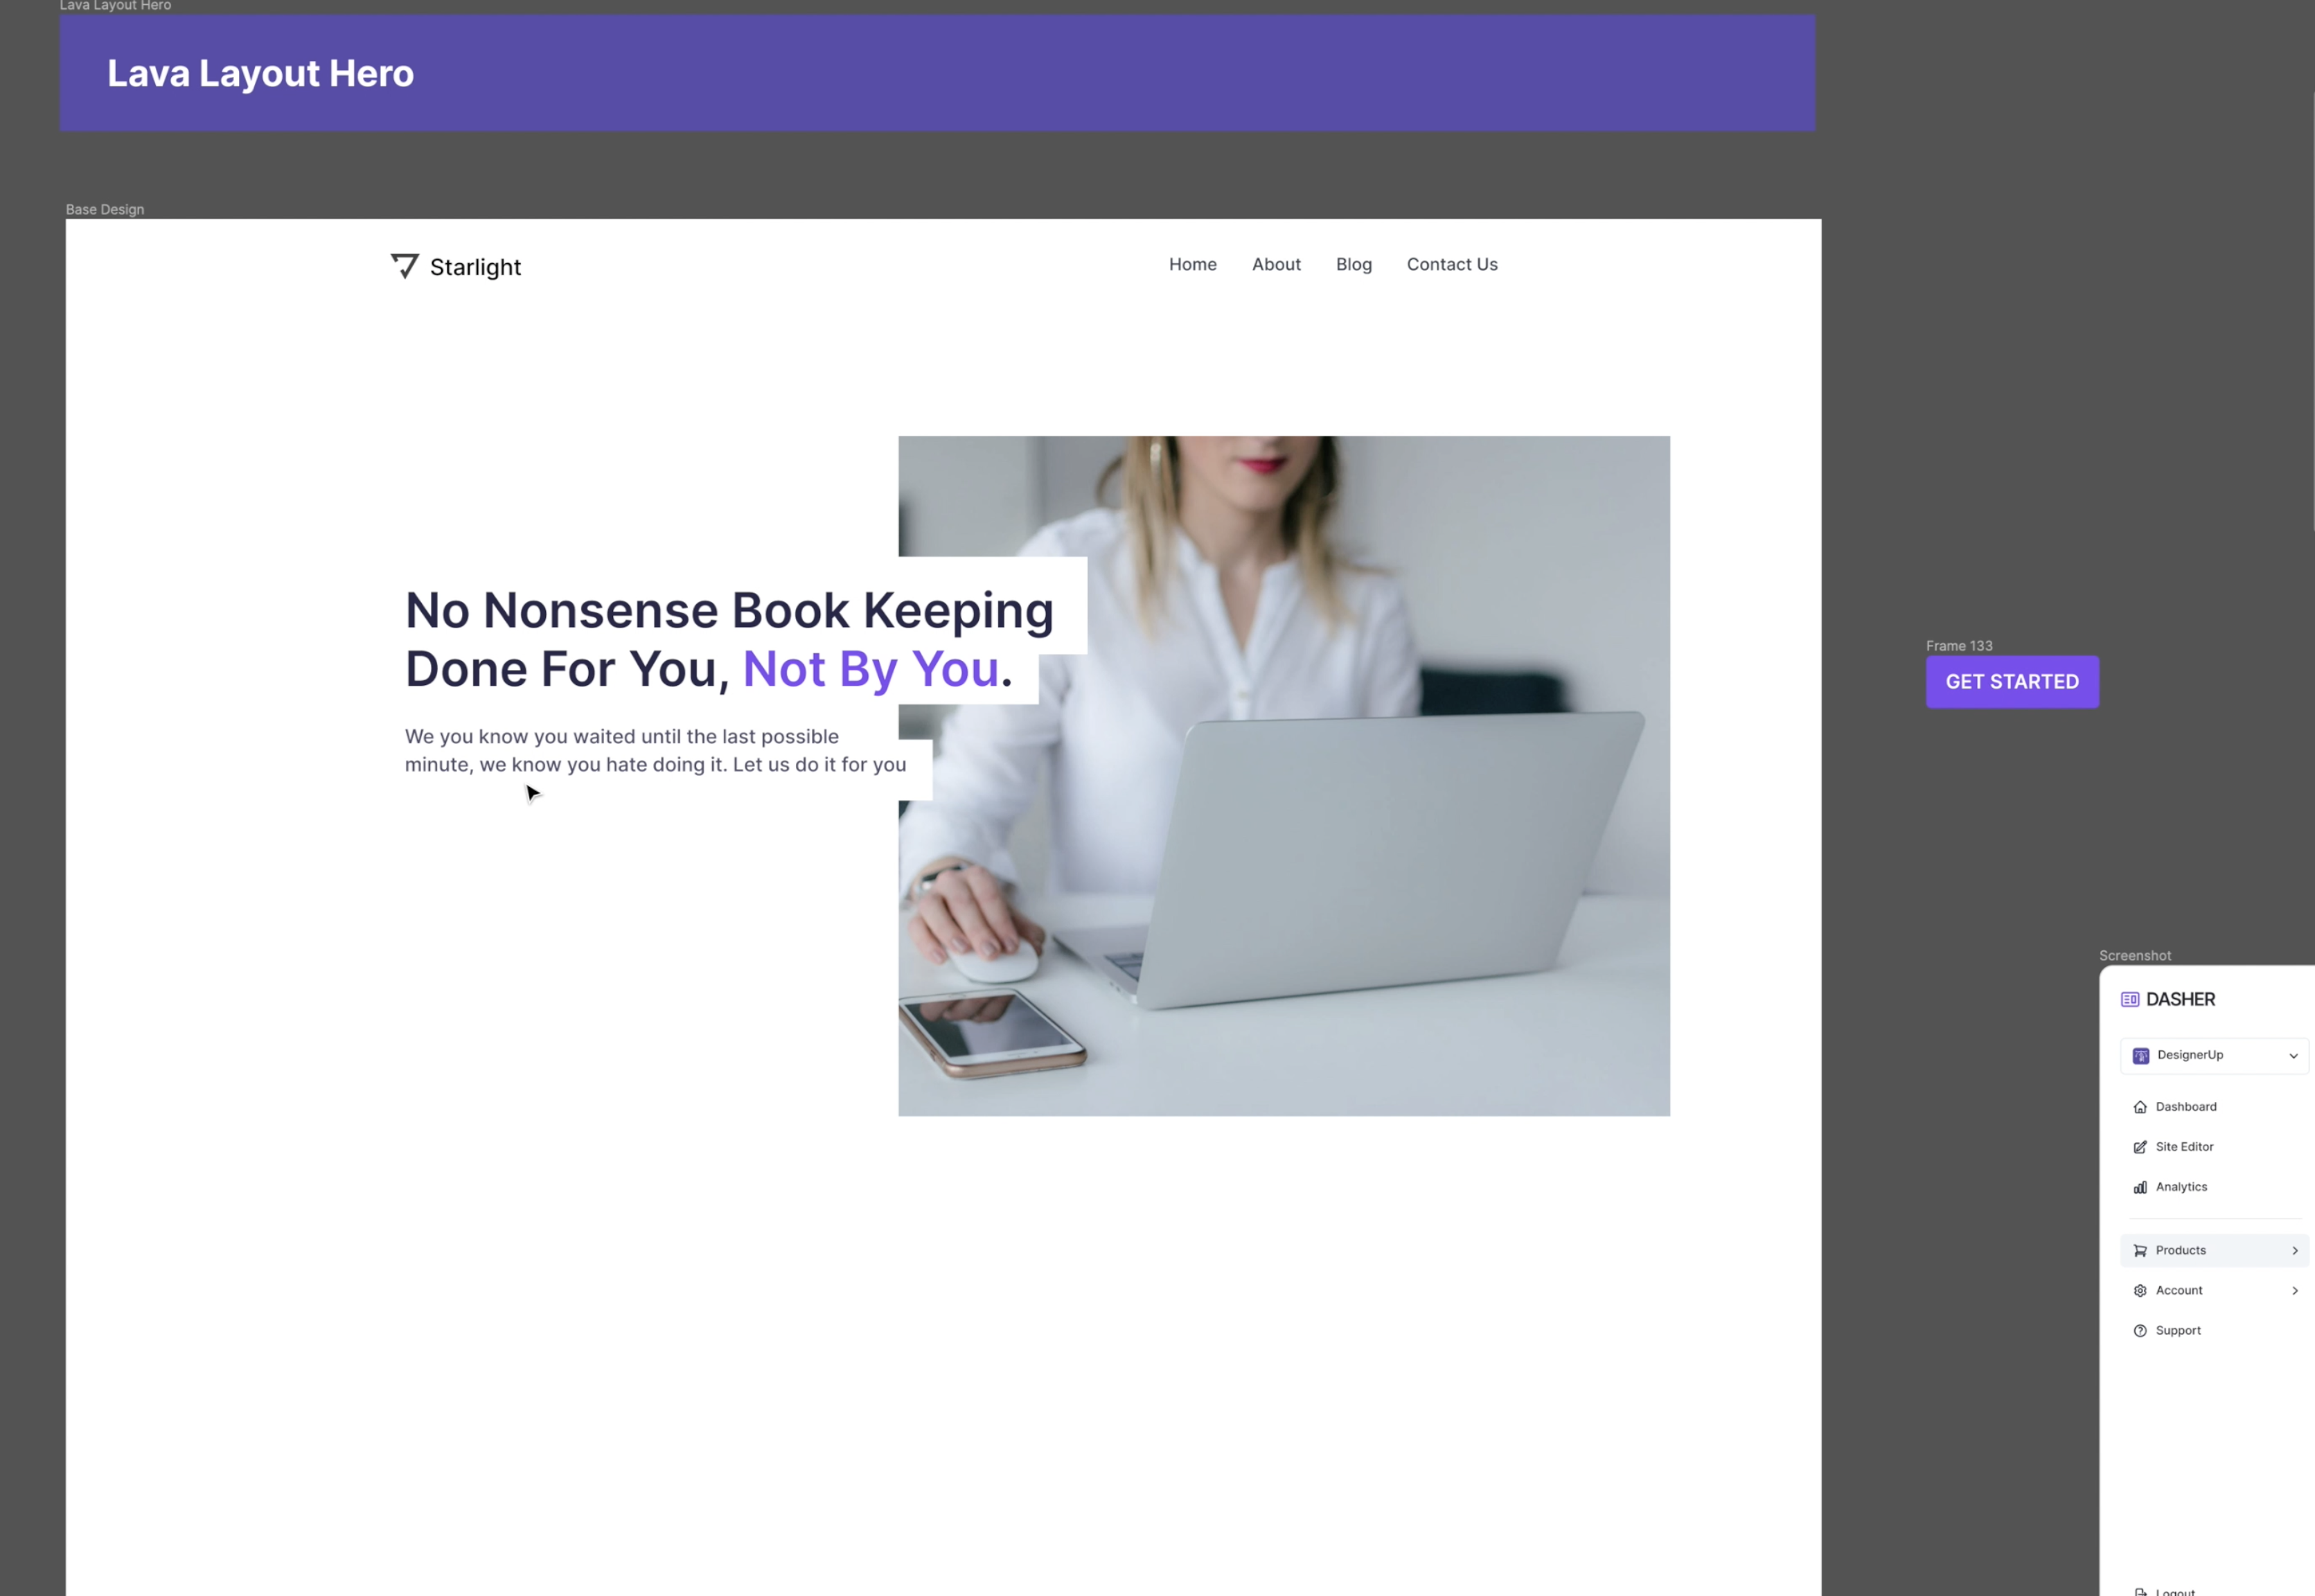 Gray and purple text with gray box as image of white women with blond hair on computer - with text overlay